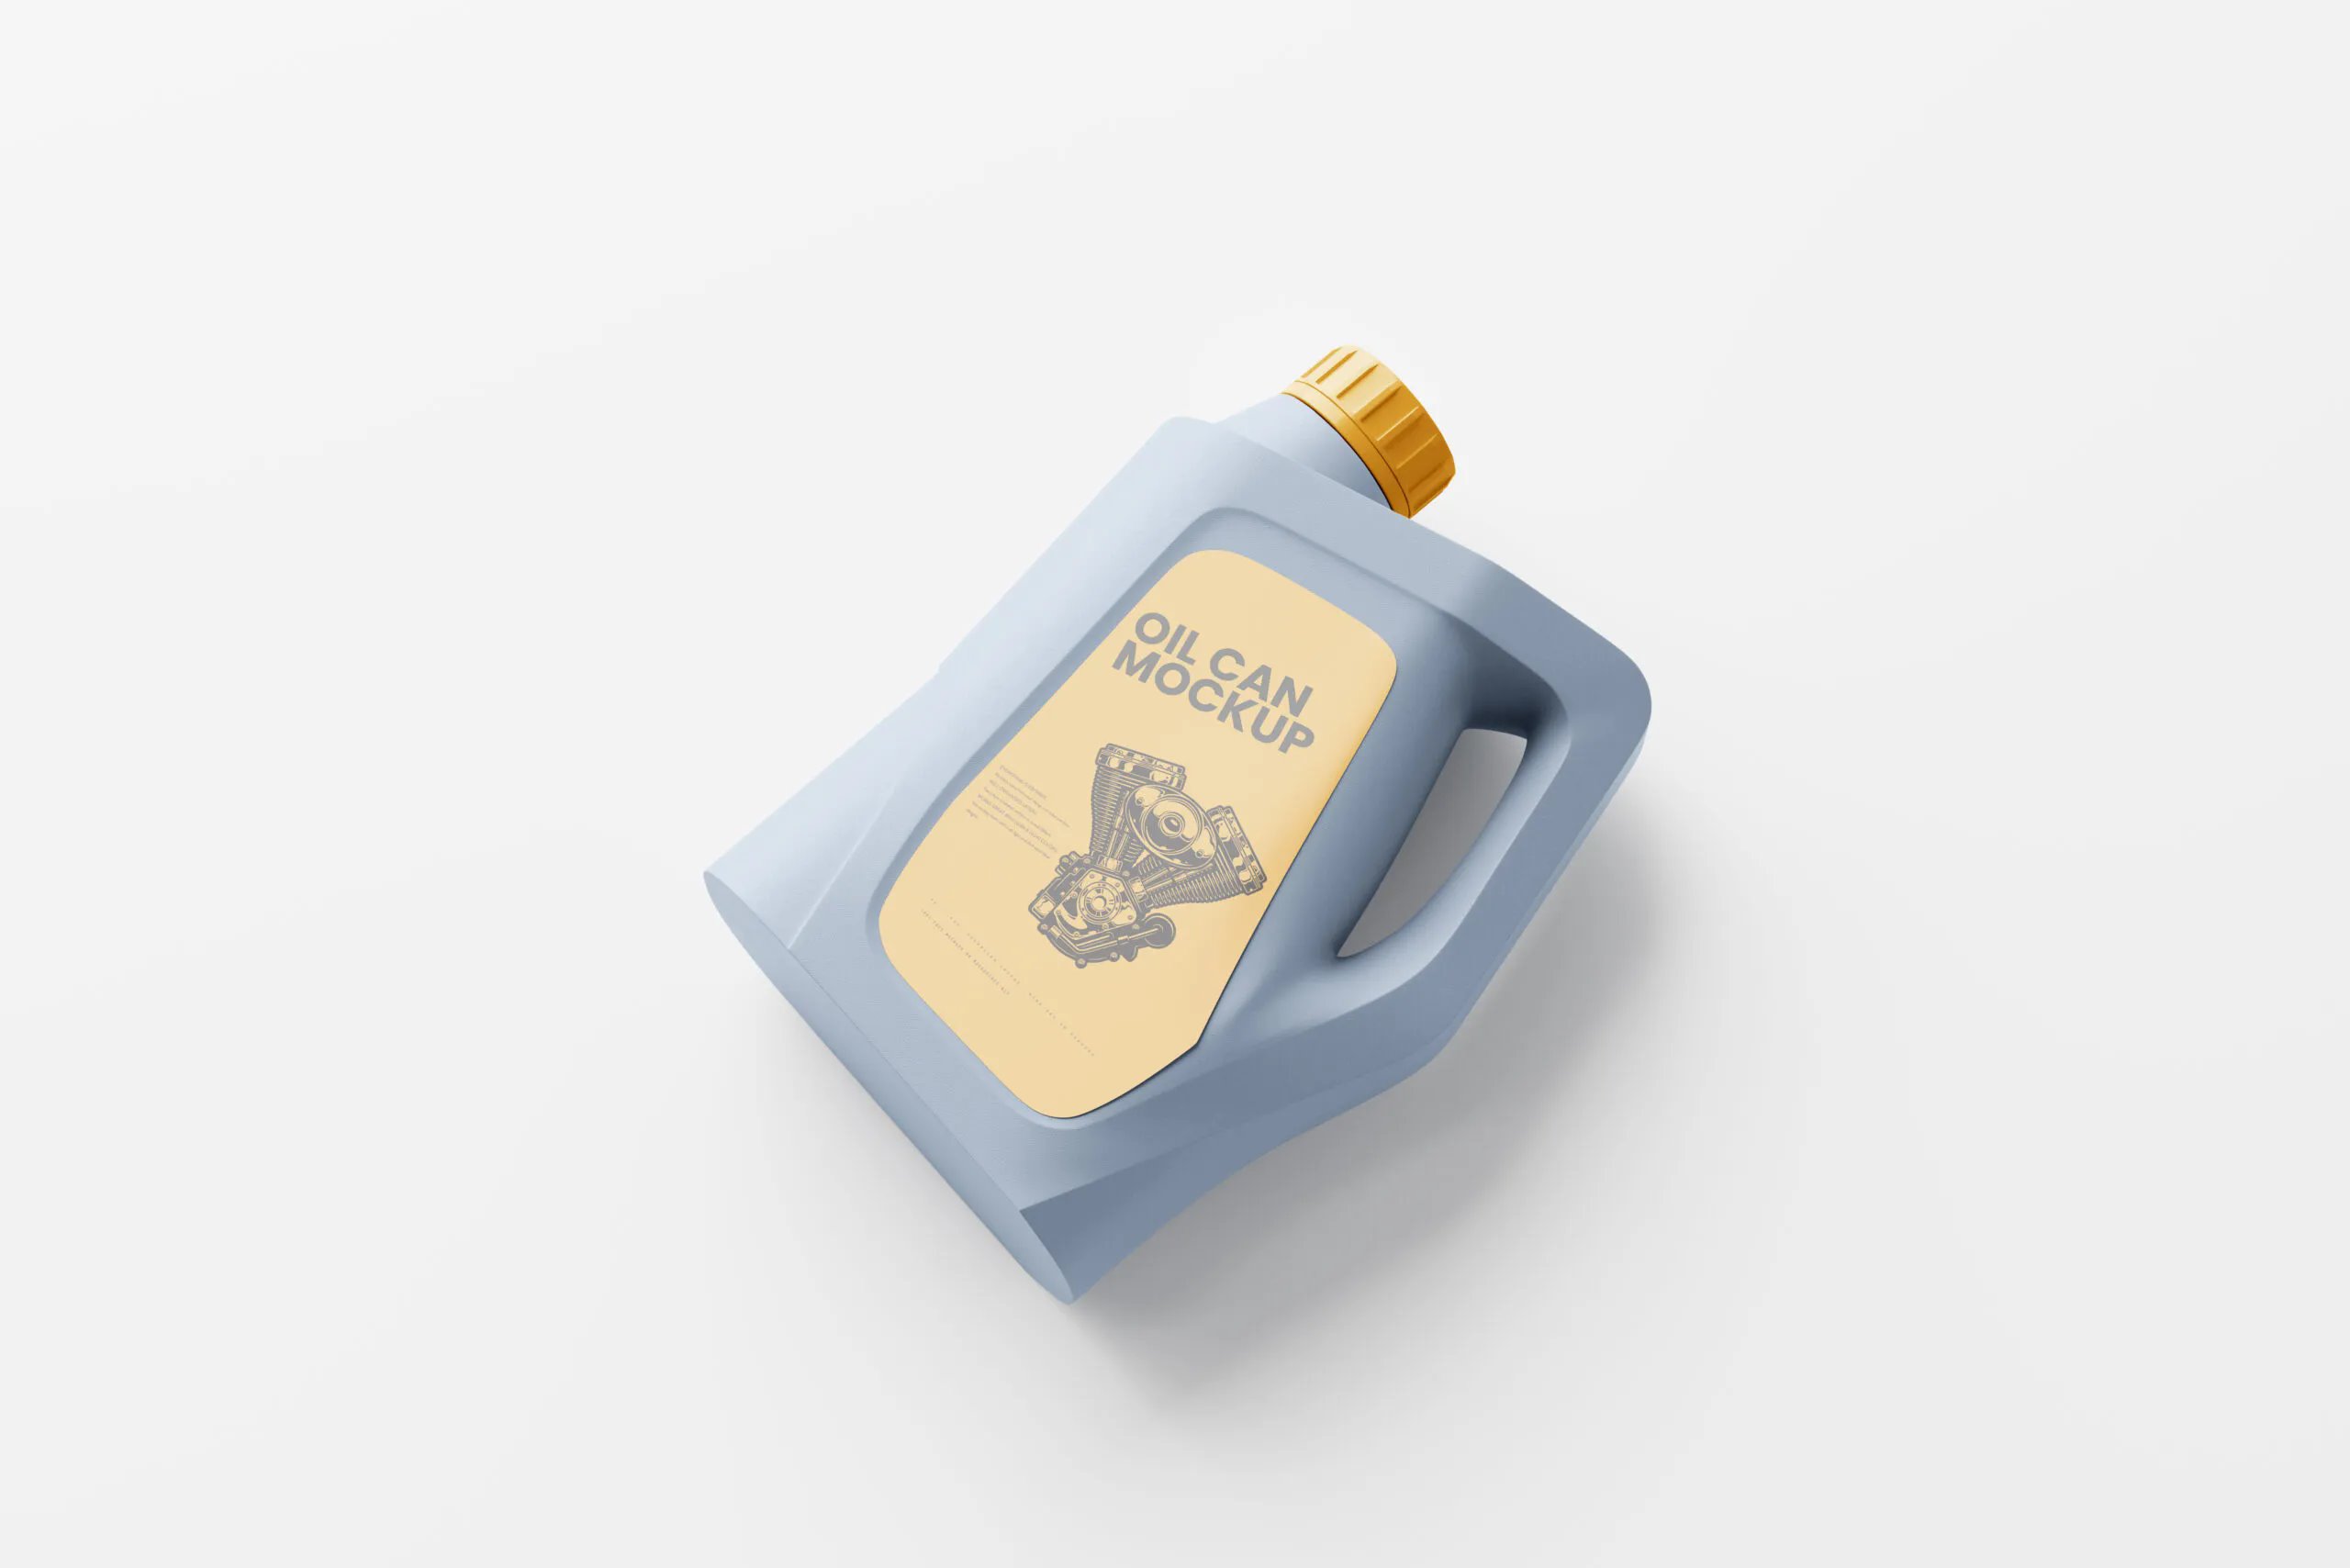 10 Plastic Engine Oil Can Mockup in Varied Sights FREE PSD